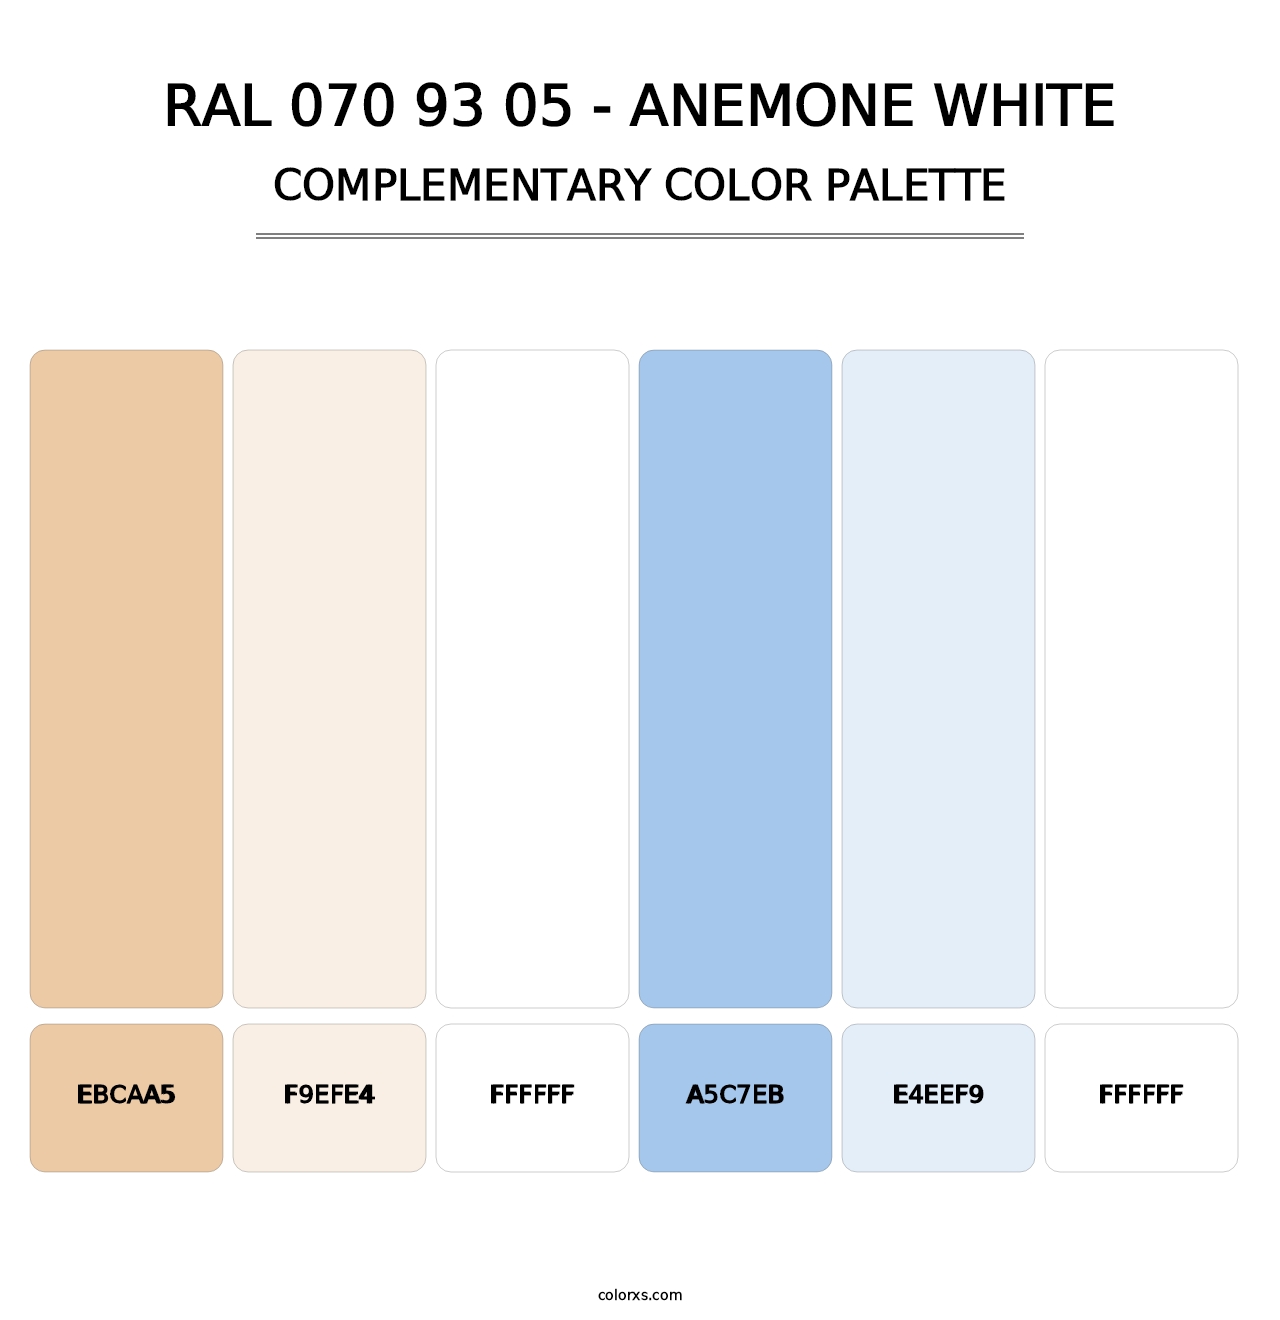 RAL 070 93 05 - Anemone White - Complementary Color Palette